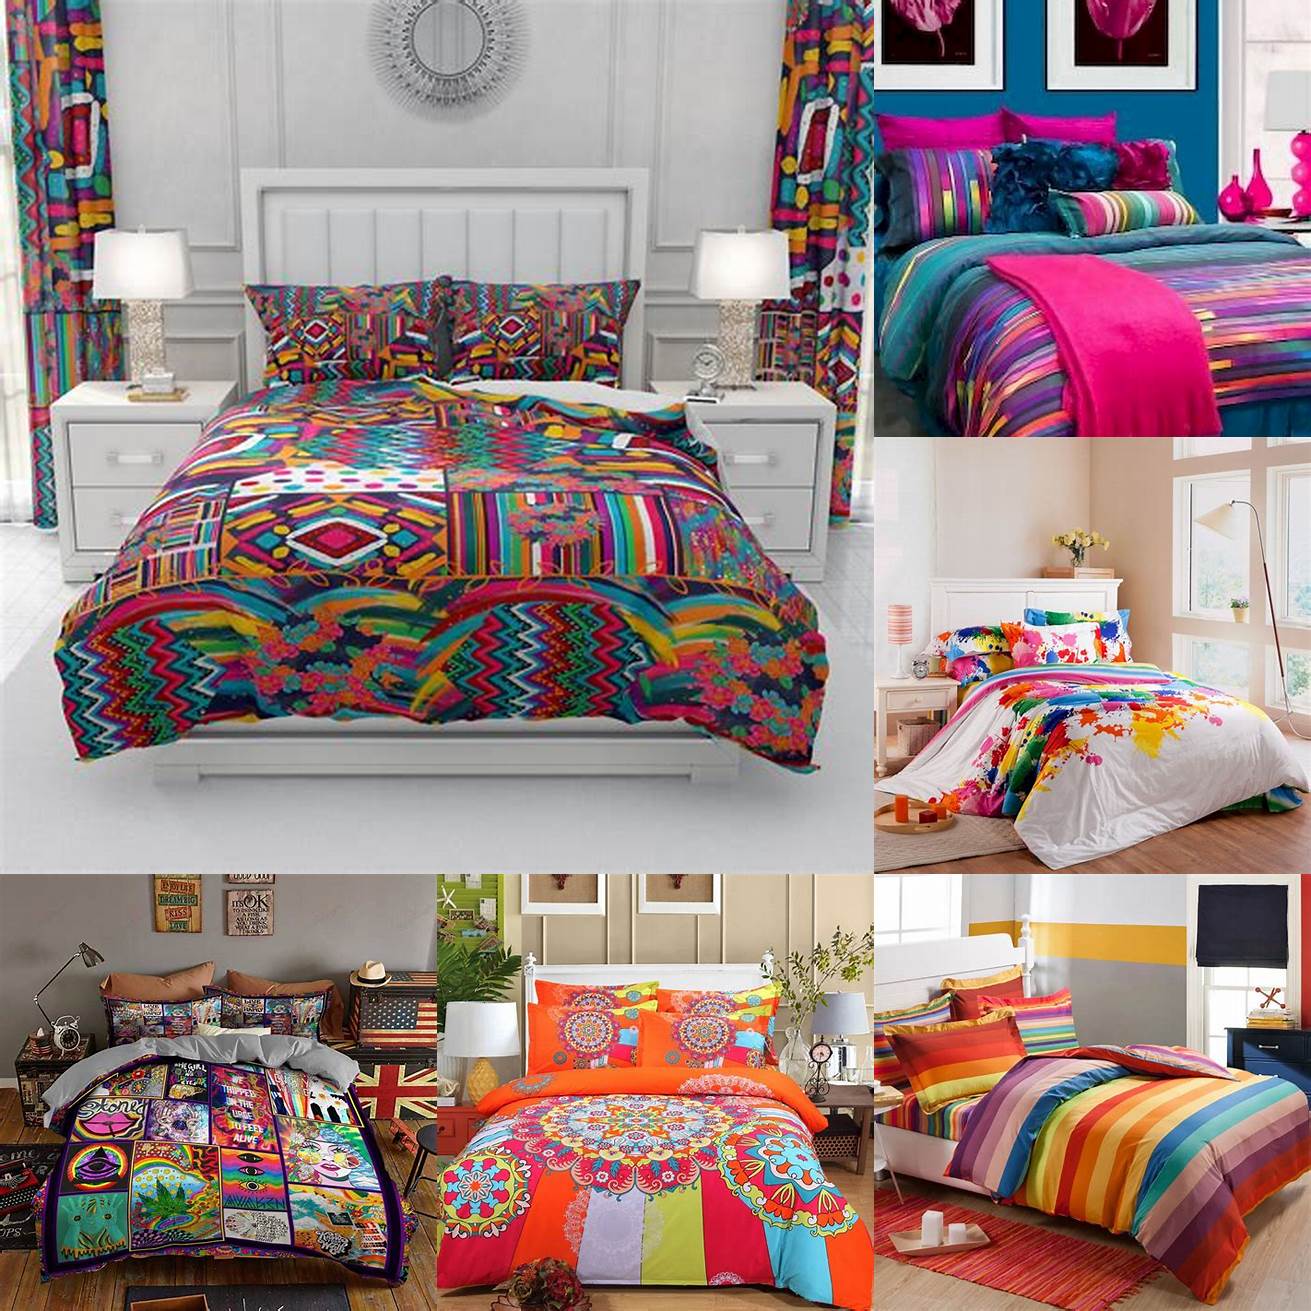 A low profile bed with colorful bedding and fun accessories